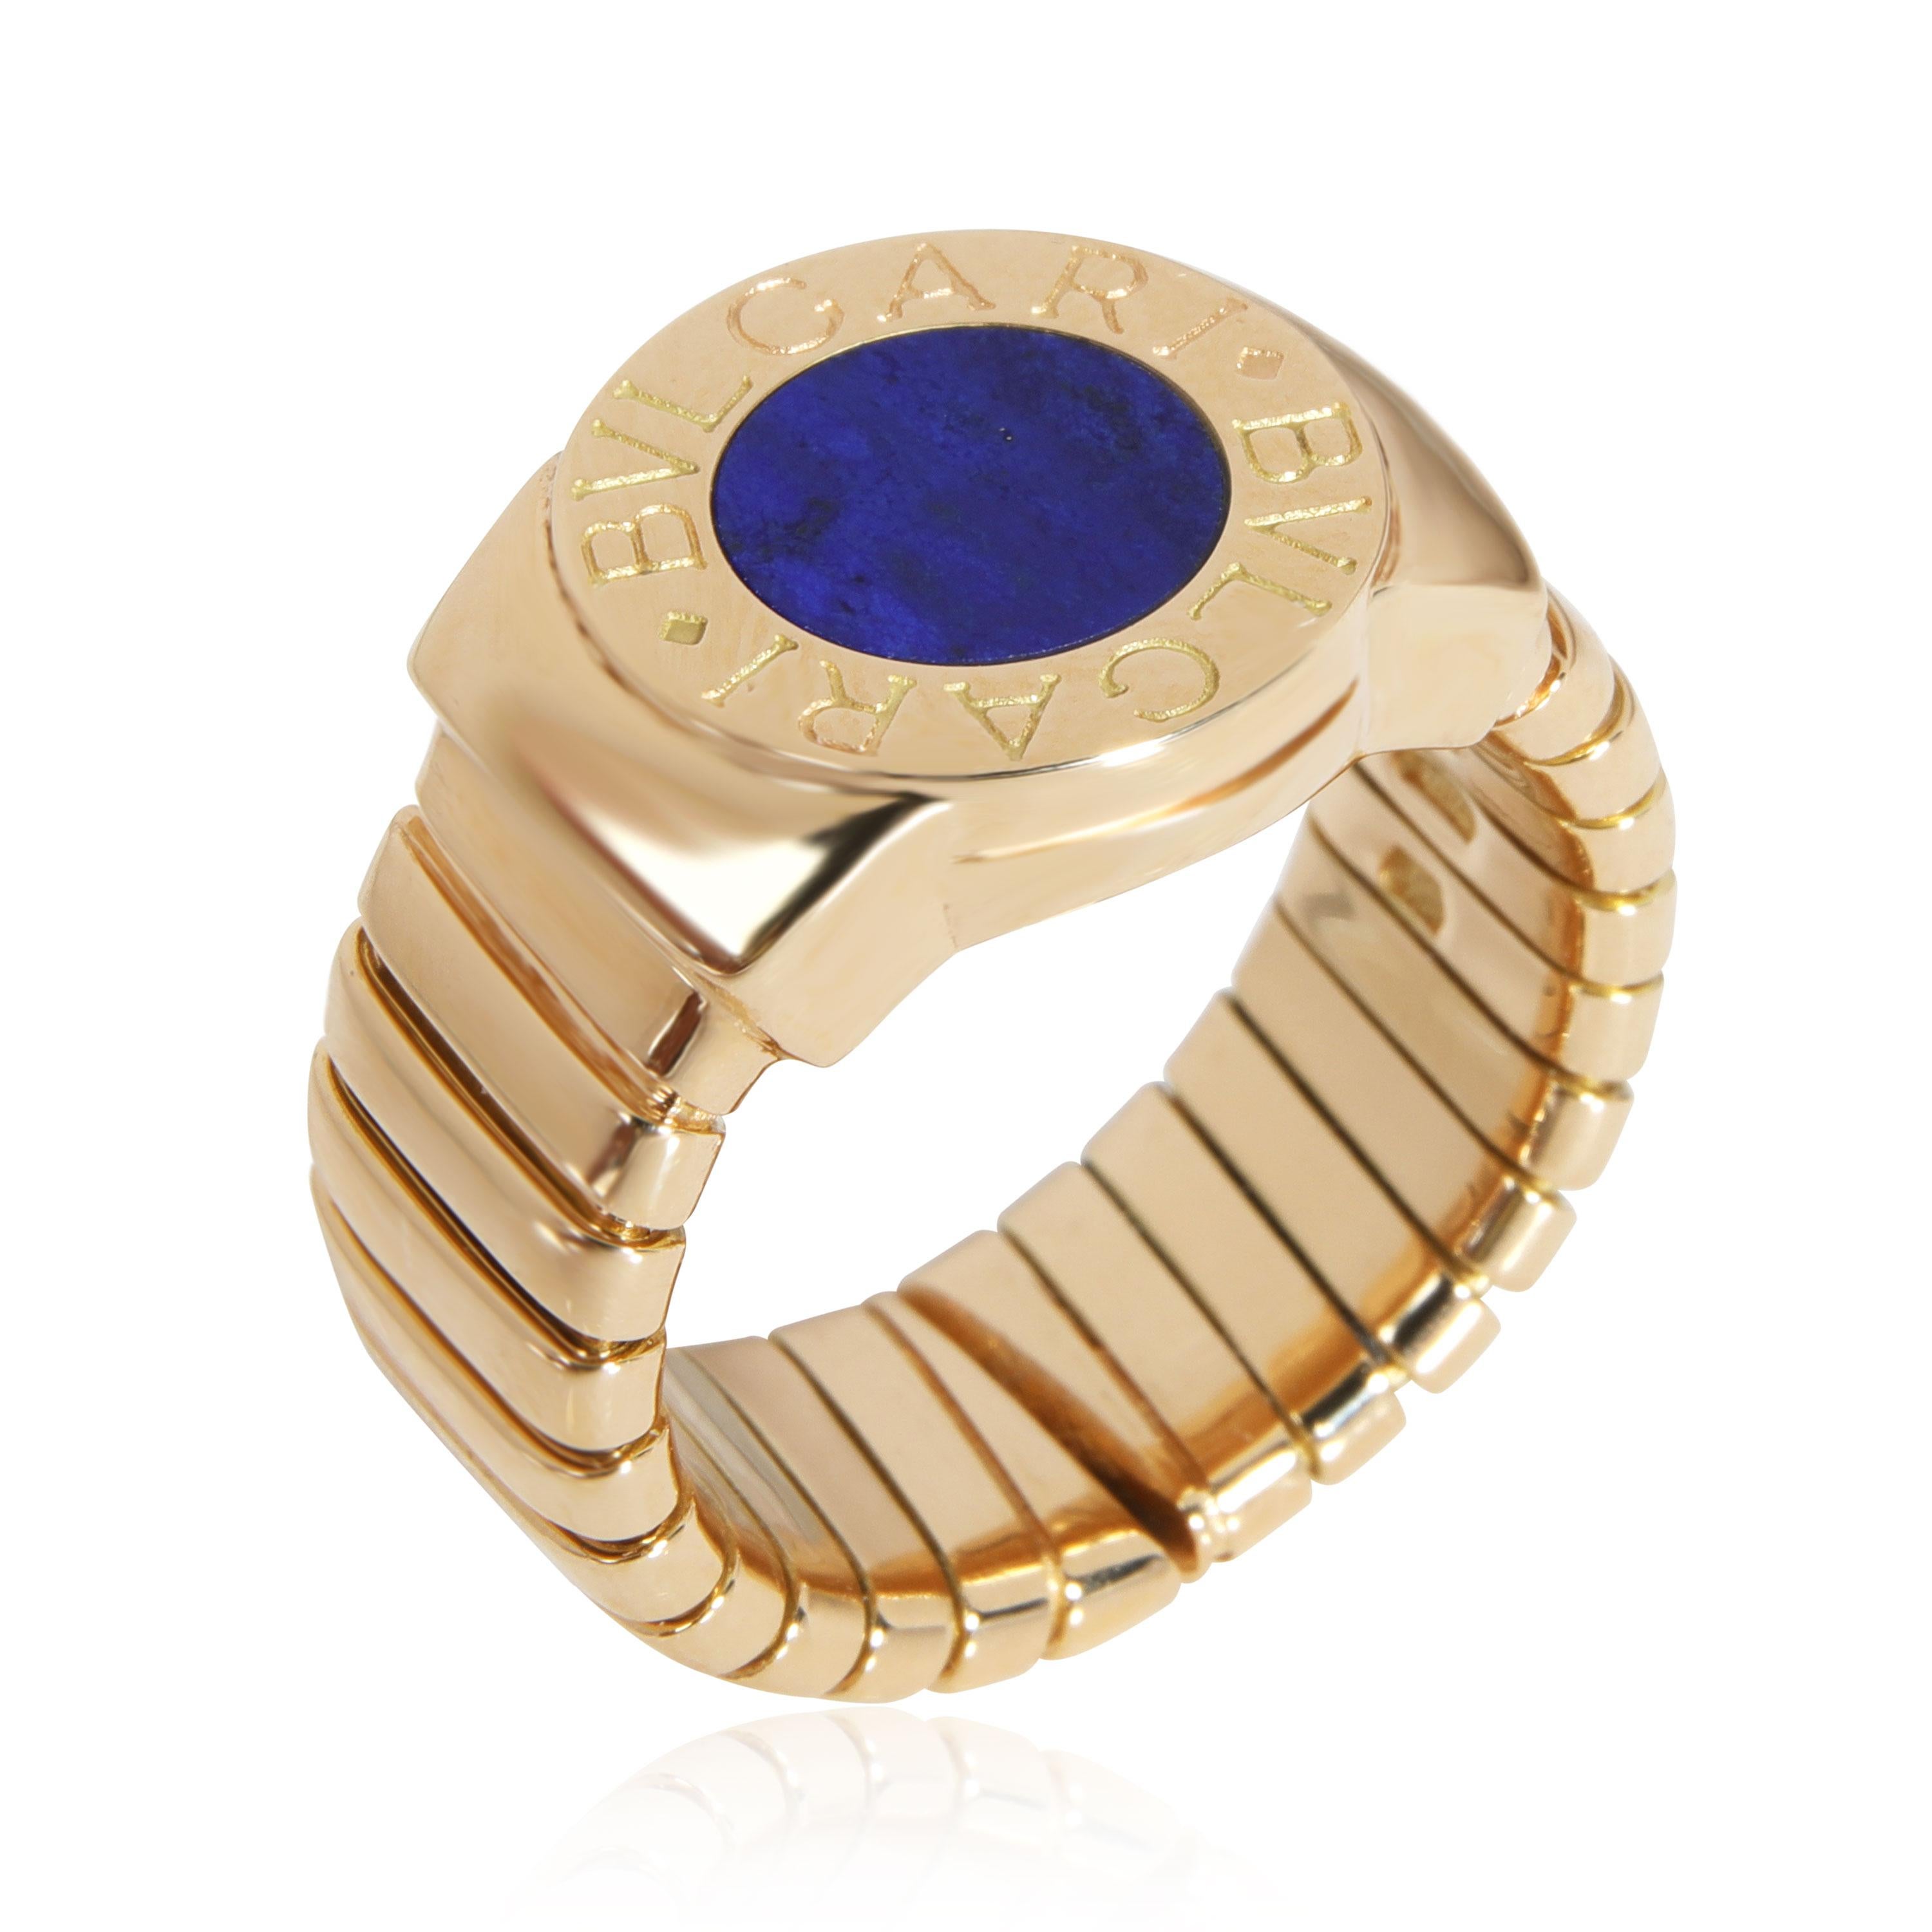 SKU: 111861
Listing Title: Bulgari Tubogas Lapis Lazuli Ring in 18K Yellow Gold
Condition Description: Retails for 3000 USD. In excellent condition and recently polished. Ring size is 5.75.Comes with Pouch;Service Papers;
Brand: